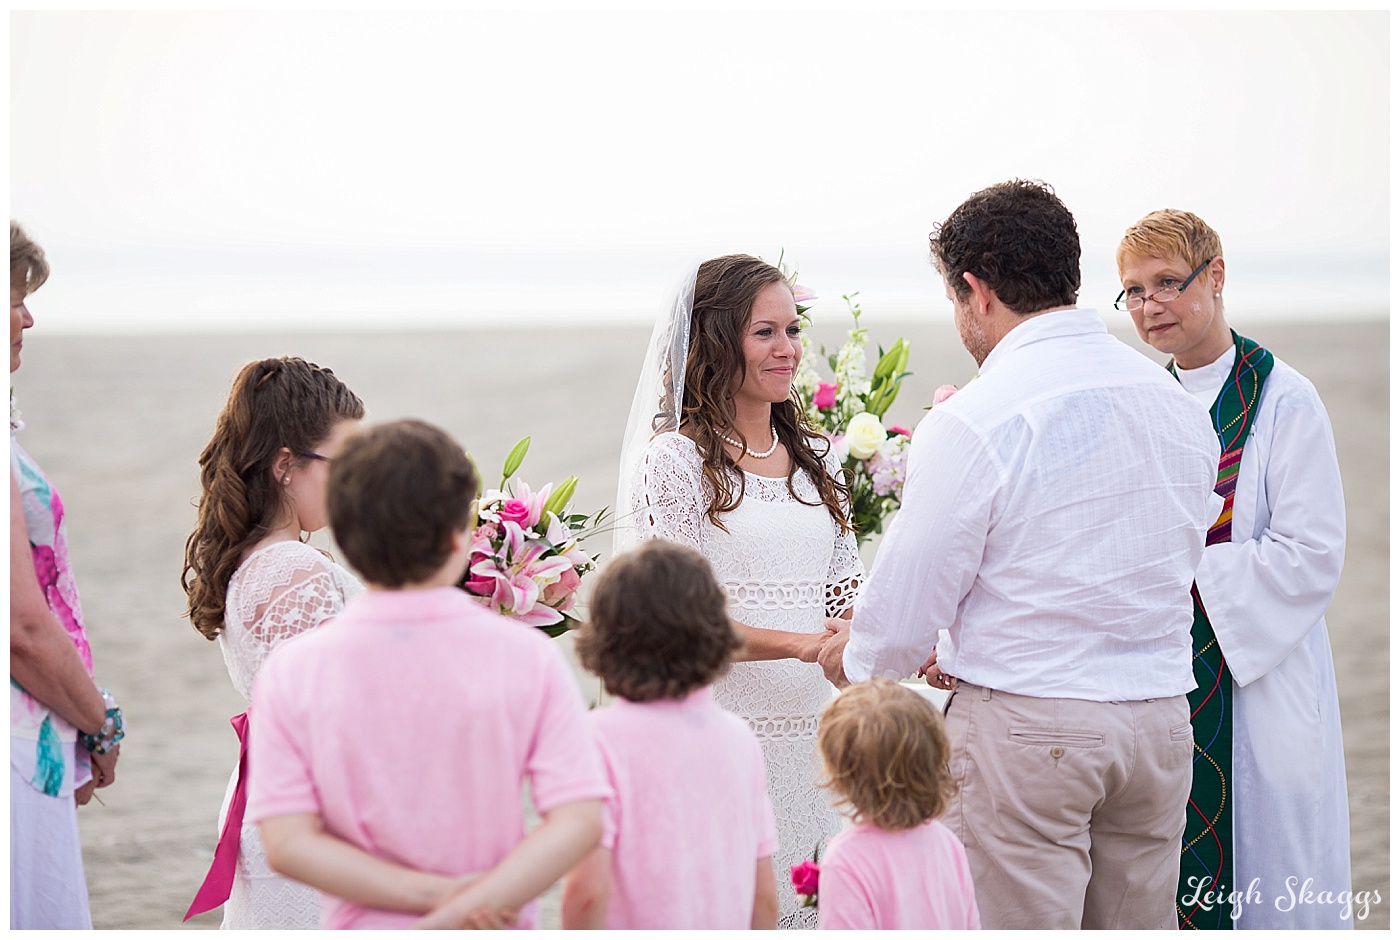 Ruth and Morgan are Married!  Their Cape Charles Eastern Shore Wedding on the blog!